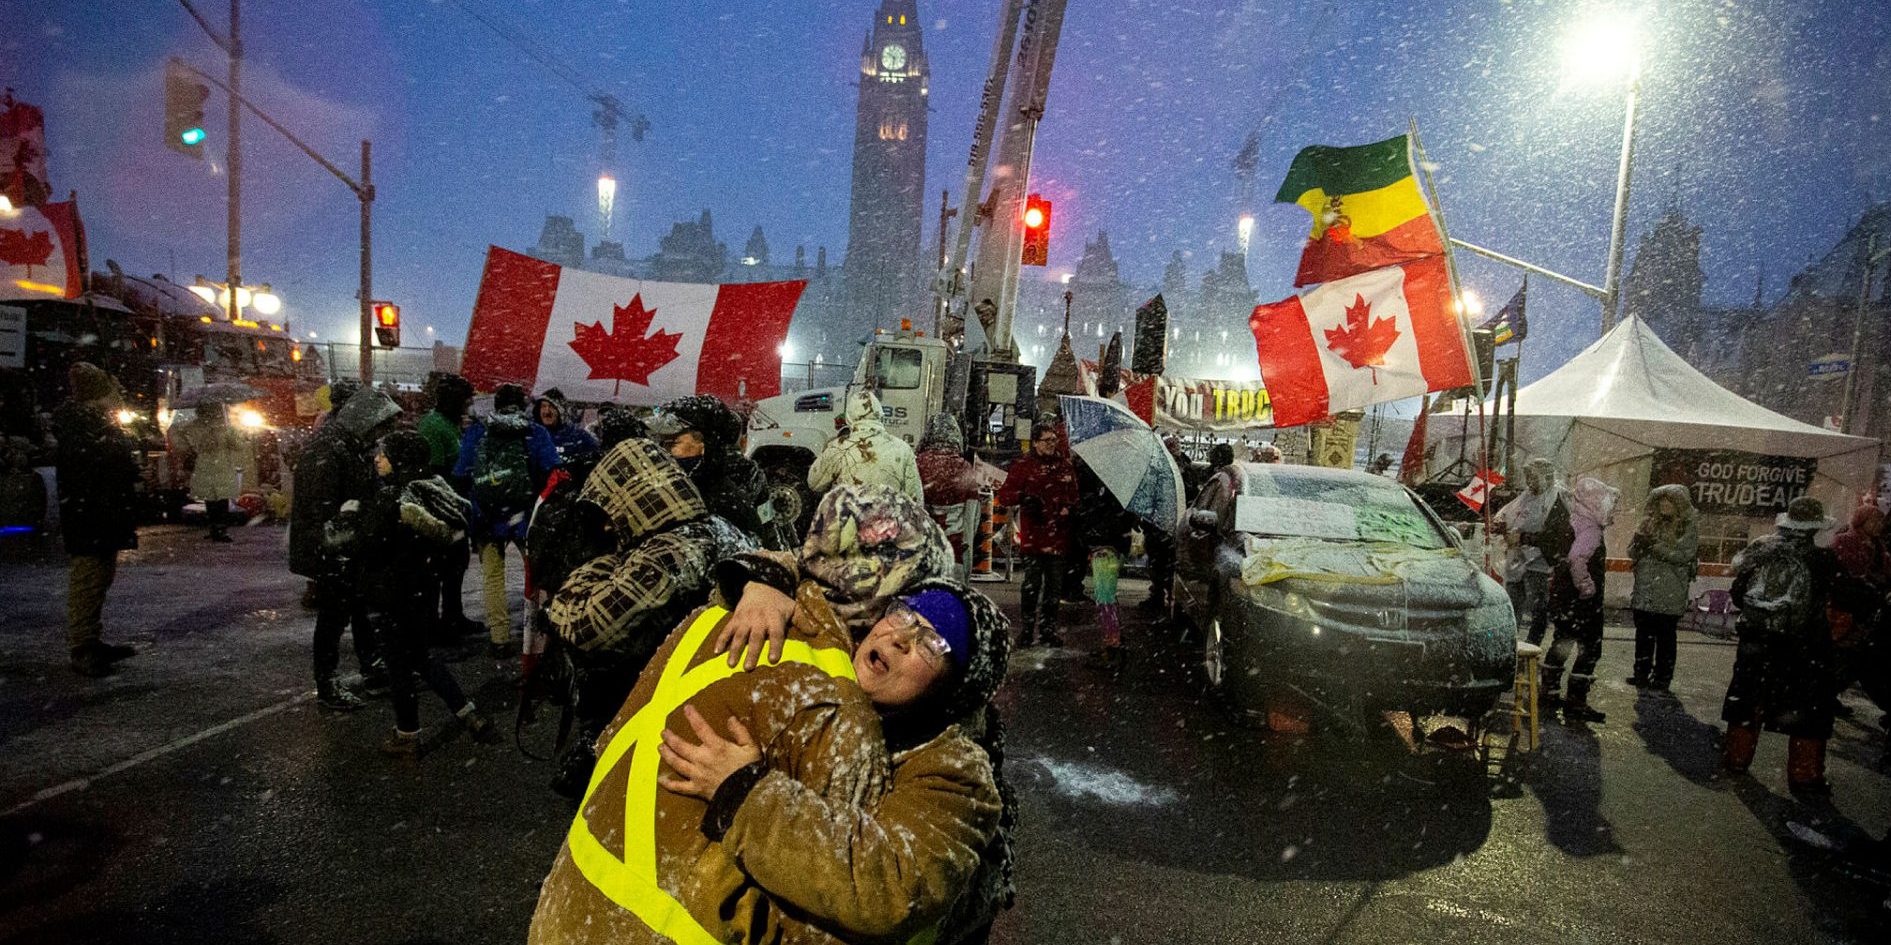 Freedom Convoy supporters embrace on Wellington Street on Feb. 17, 2022, as the convoy’s occupation of downtown Ottawa enters the third week.
Andrew Meade